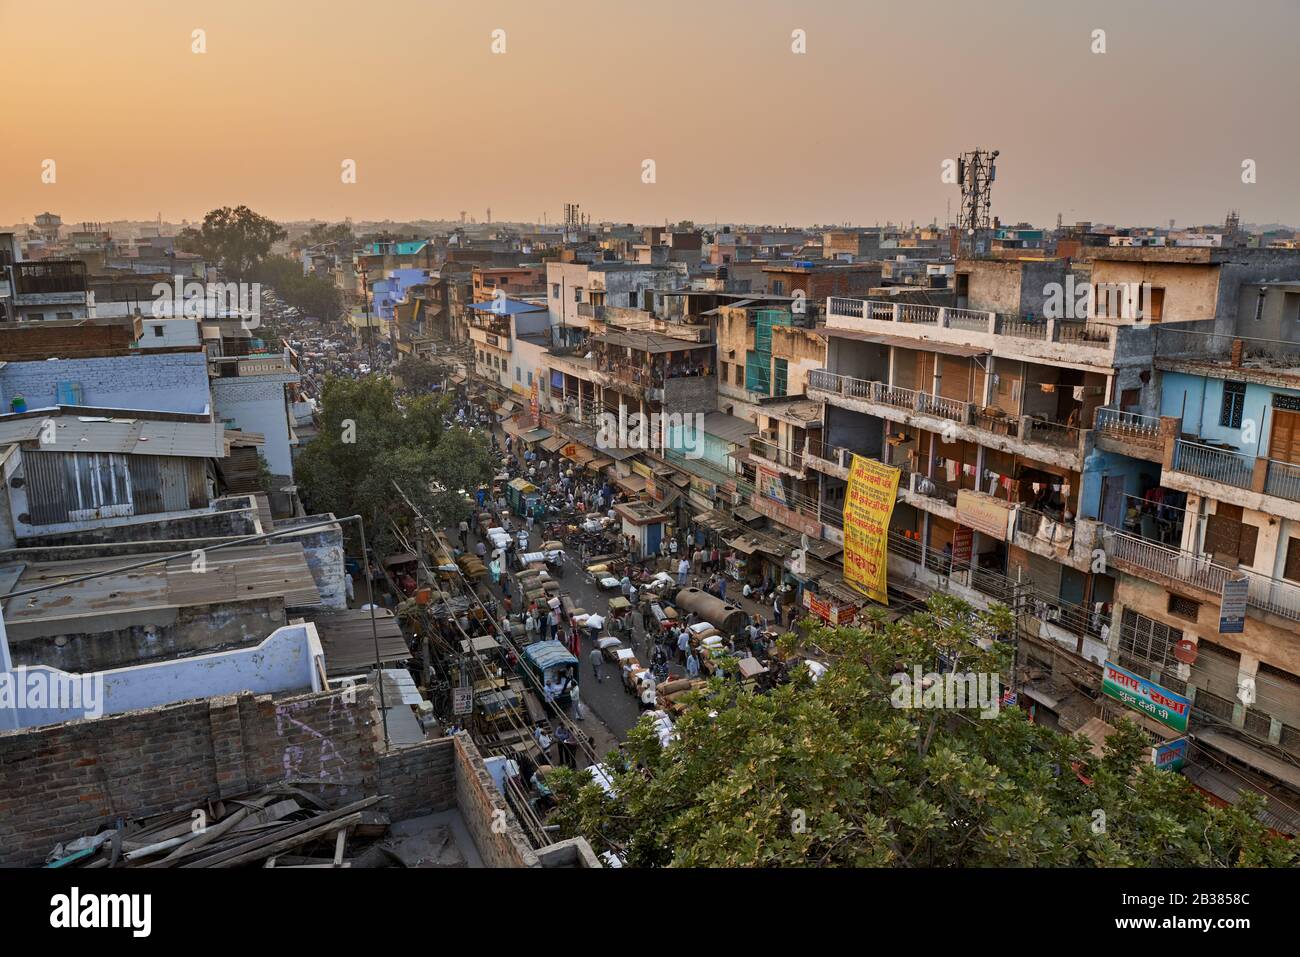 areal view on Swami Vivekanand Marg road and Old Dehli spice market, Delhi, India Stock Photo